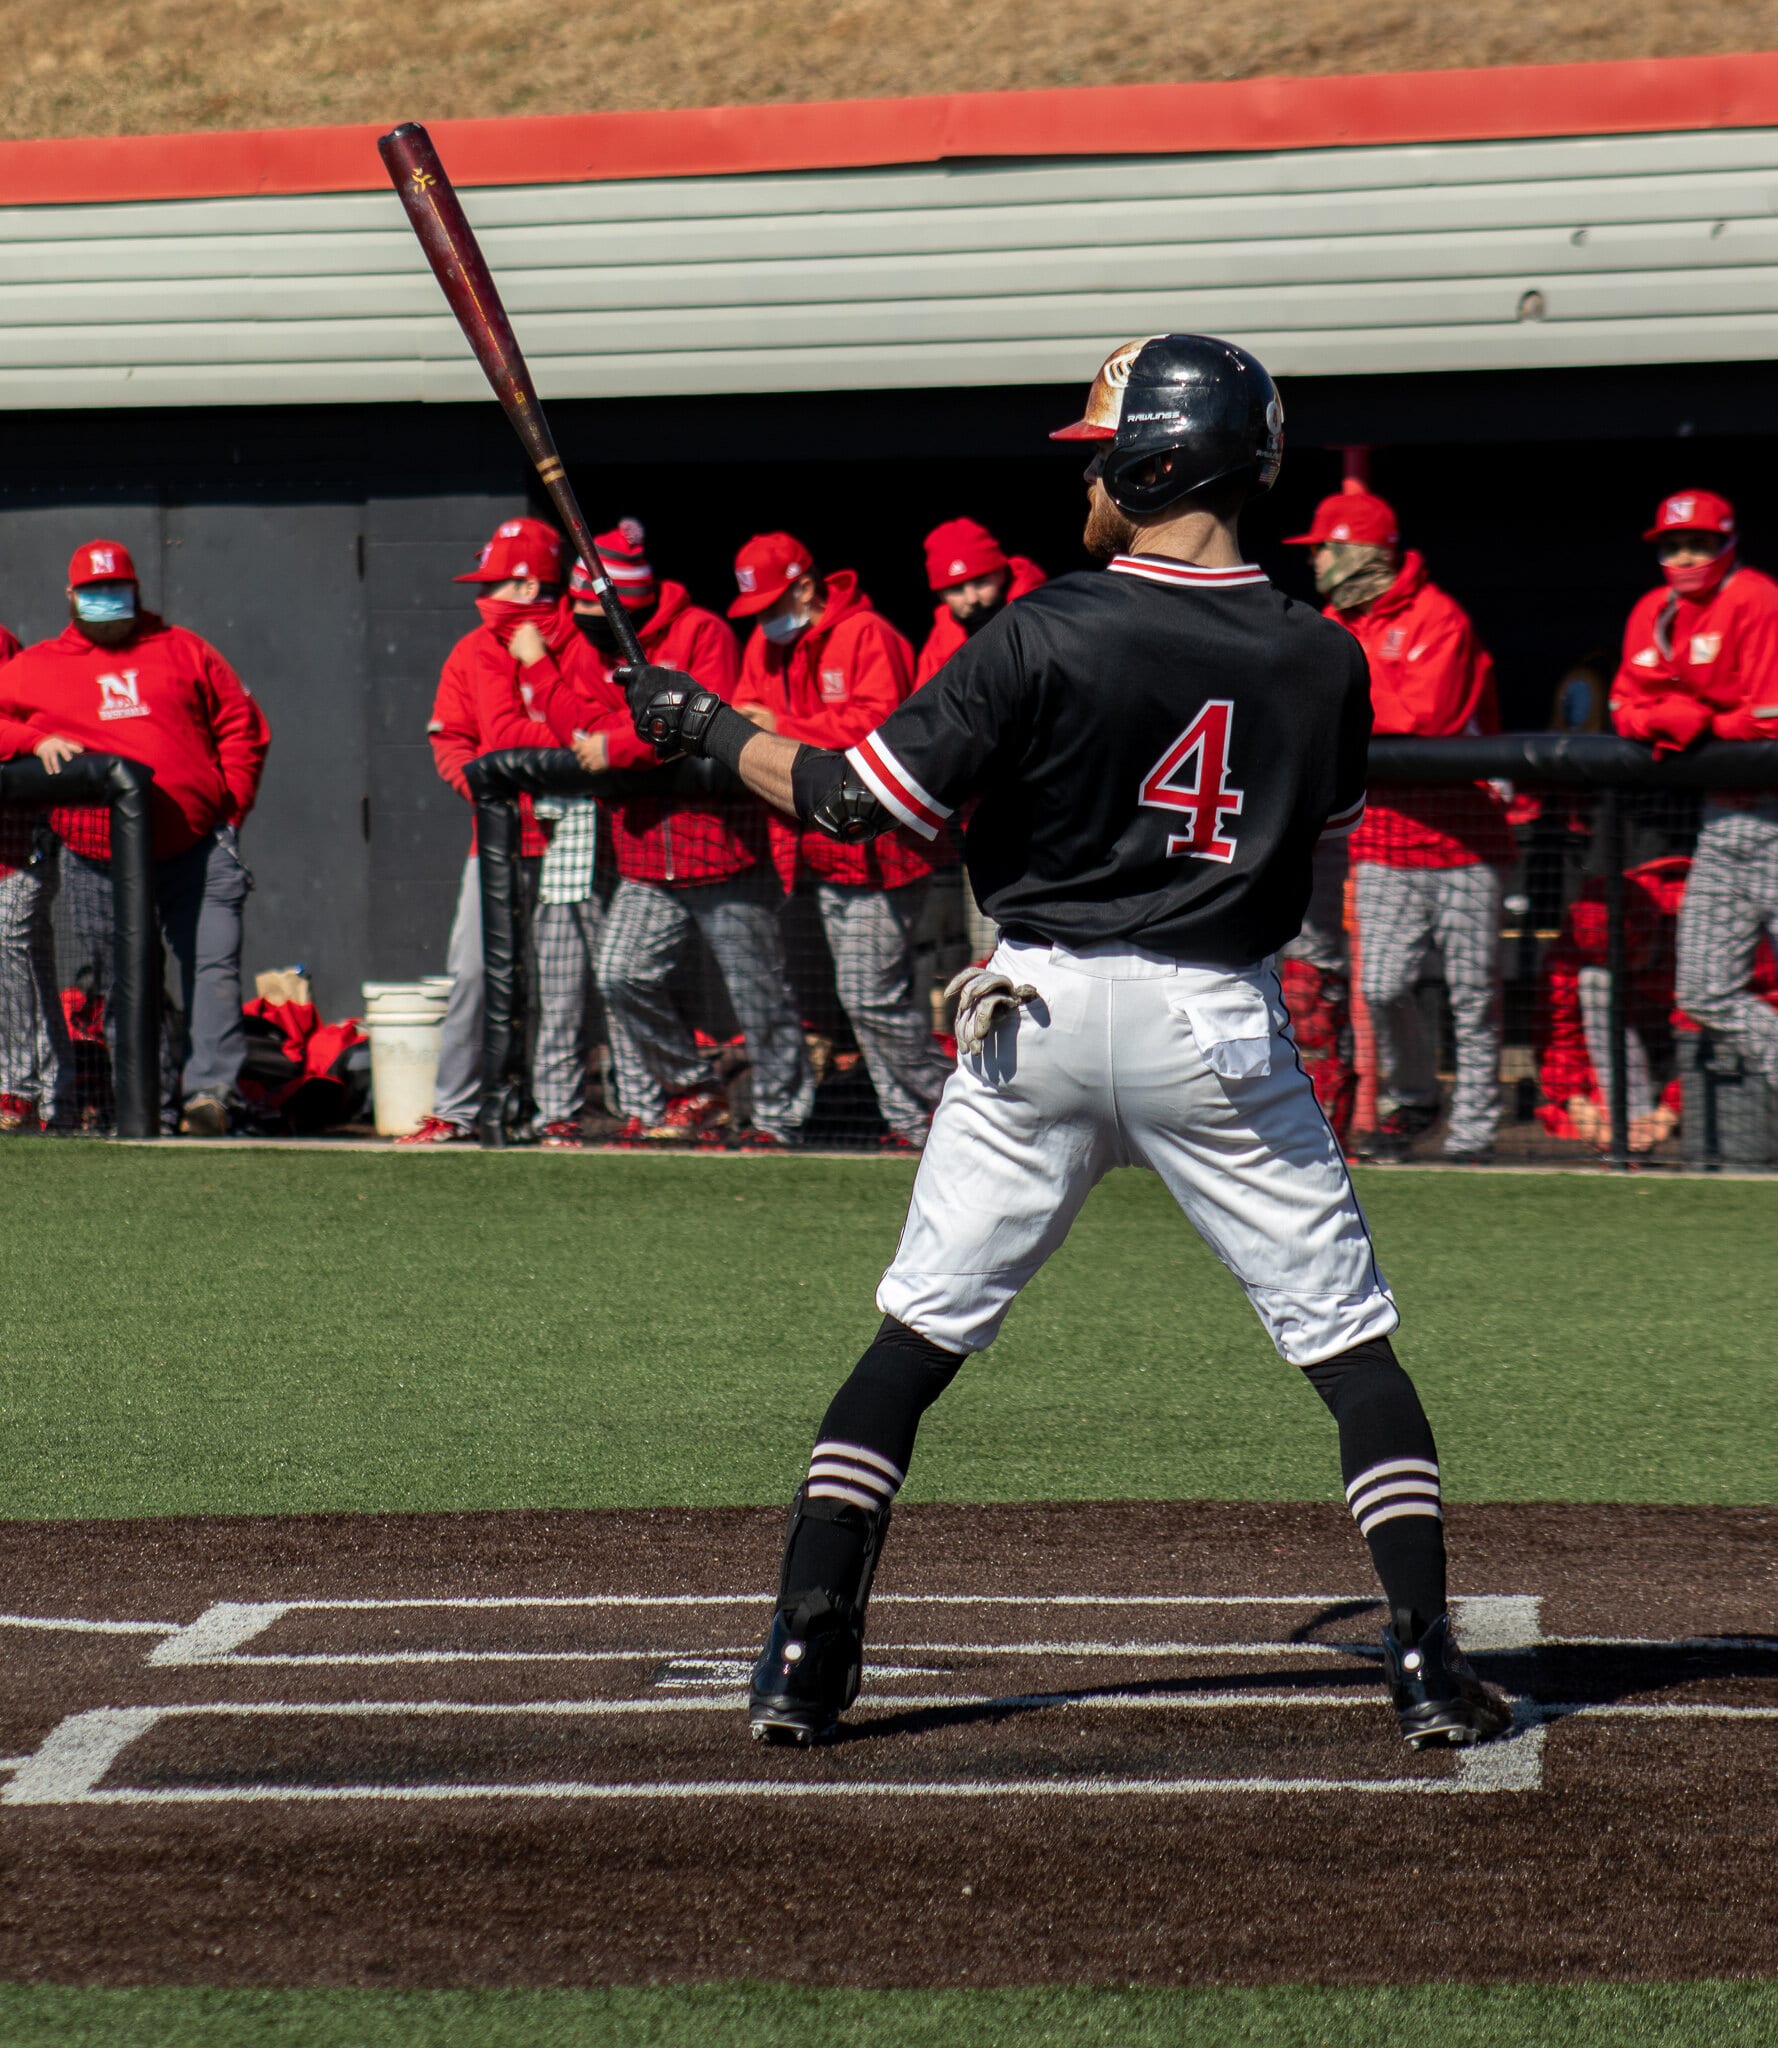 Junior transfer and outfielder Ethan Stringer plays in his first home game at NGU.